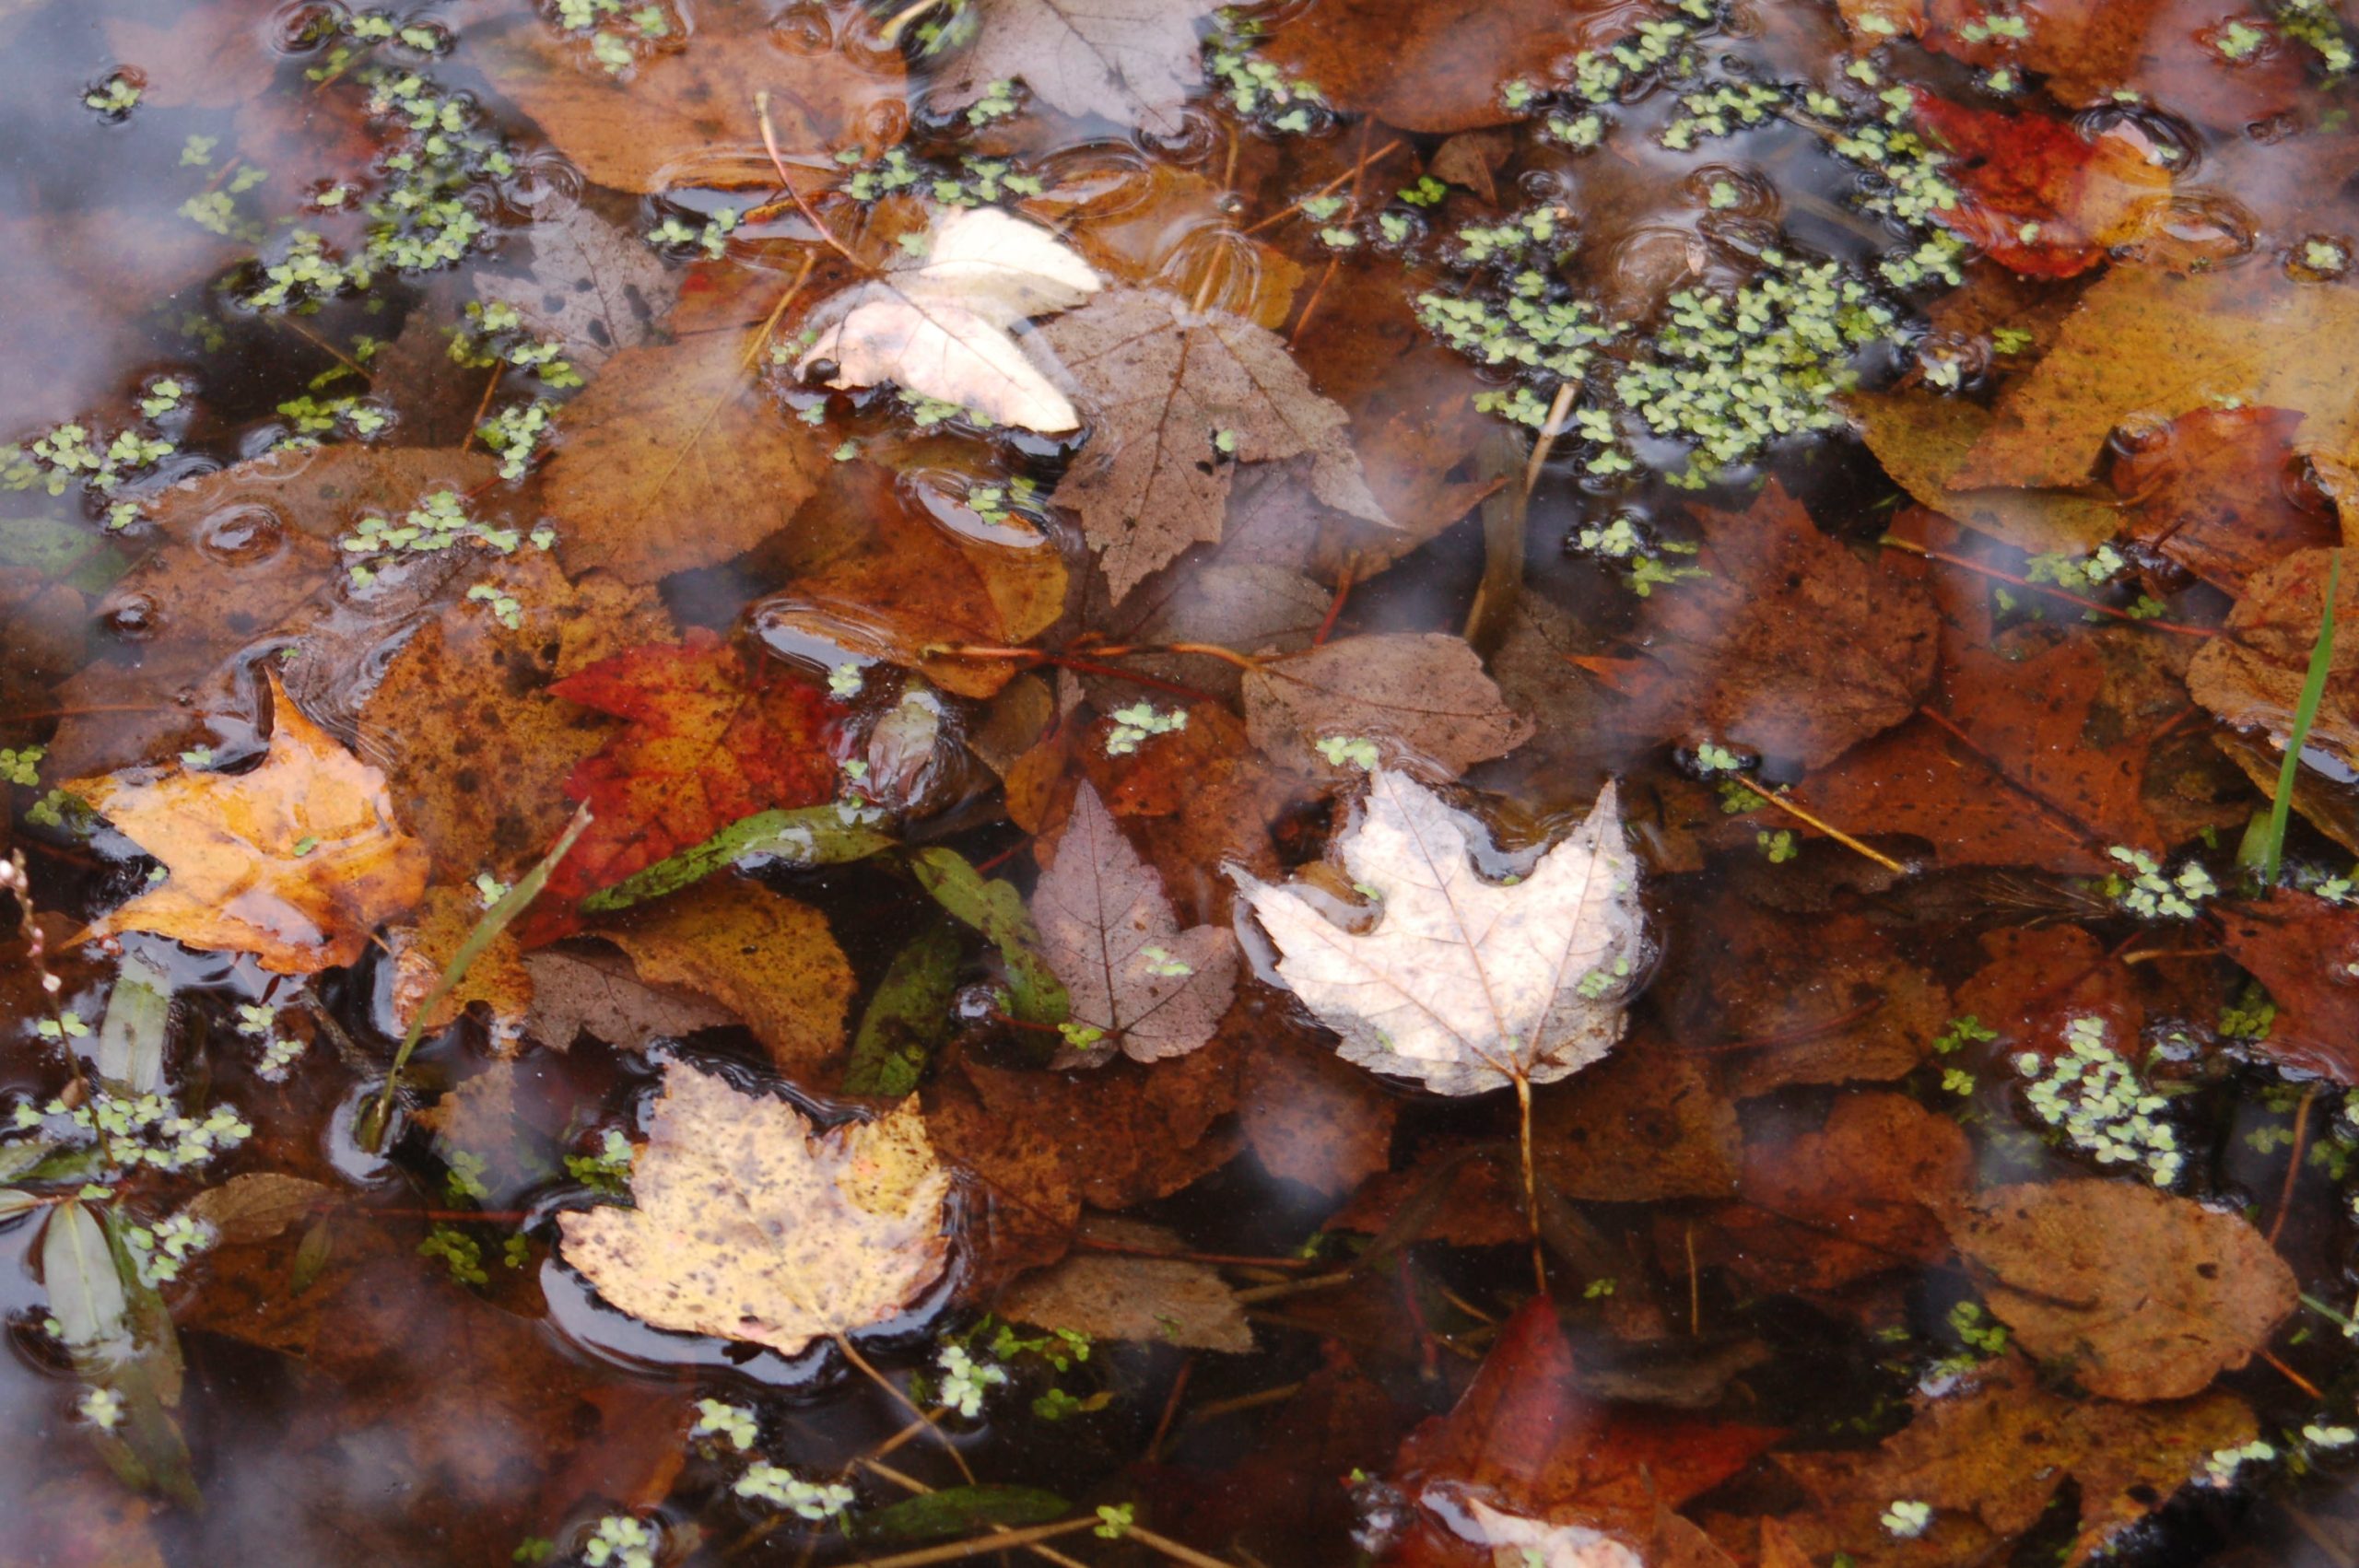 Leaves In Water (user submitted)